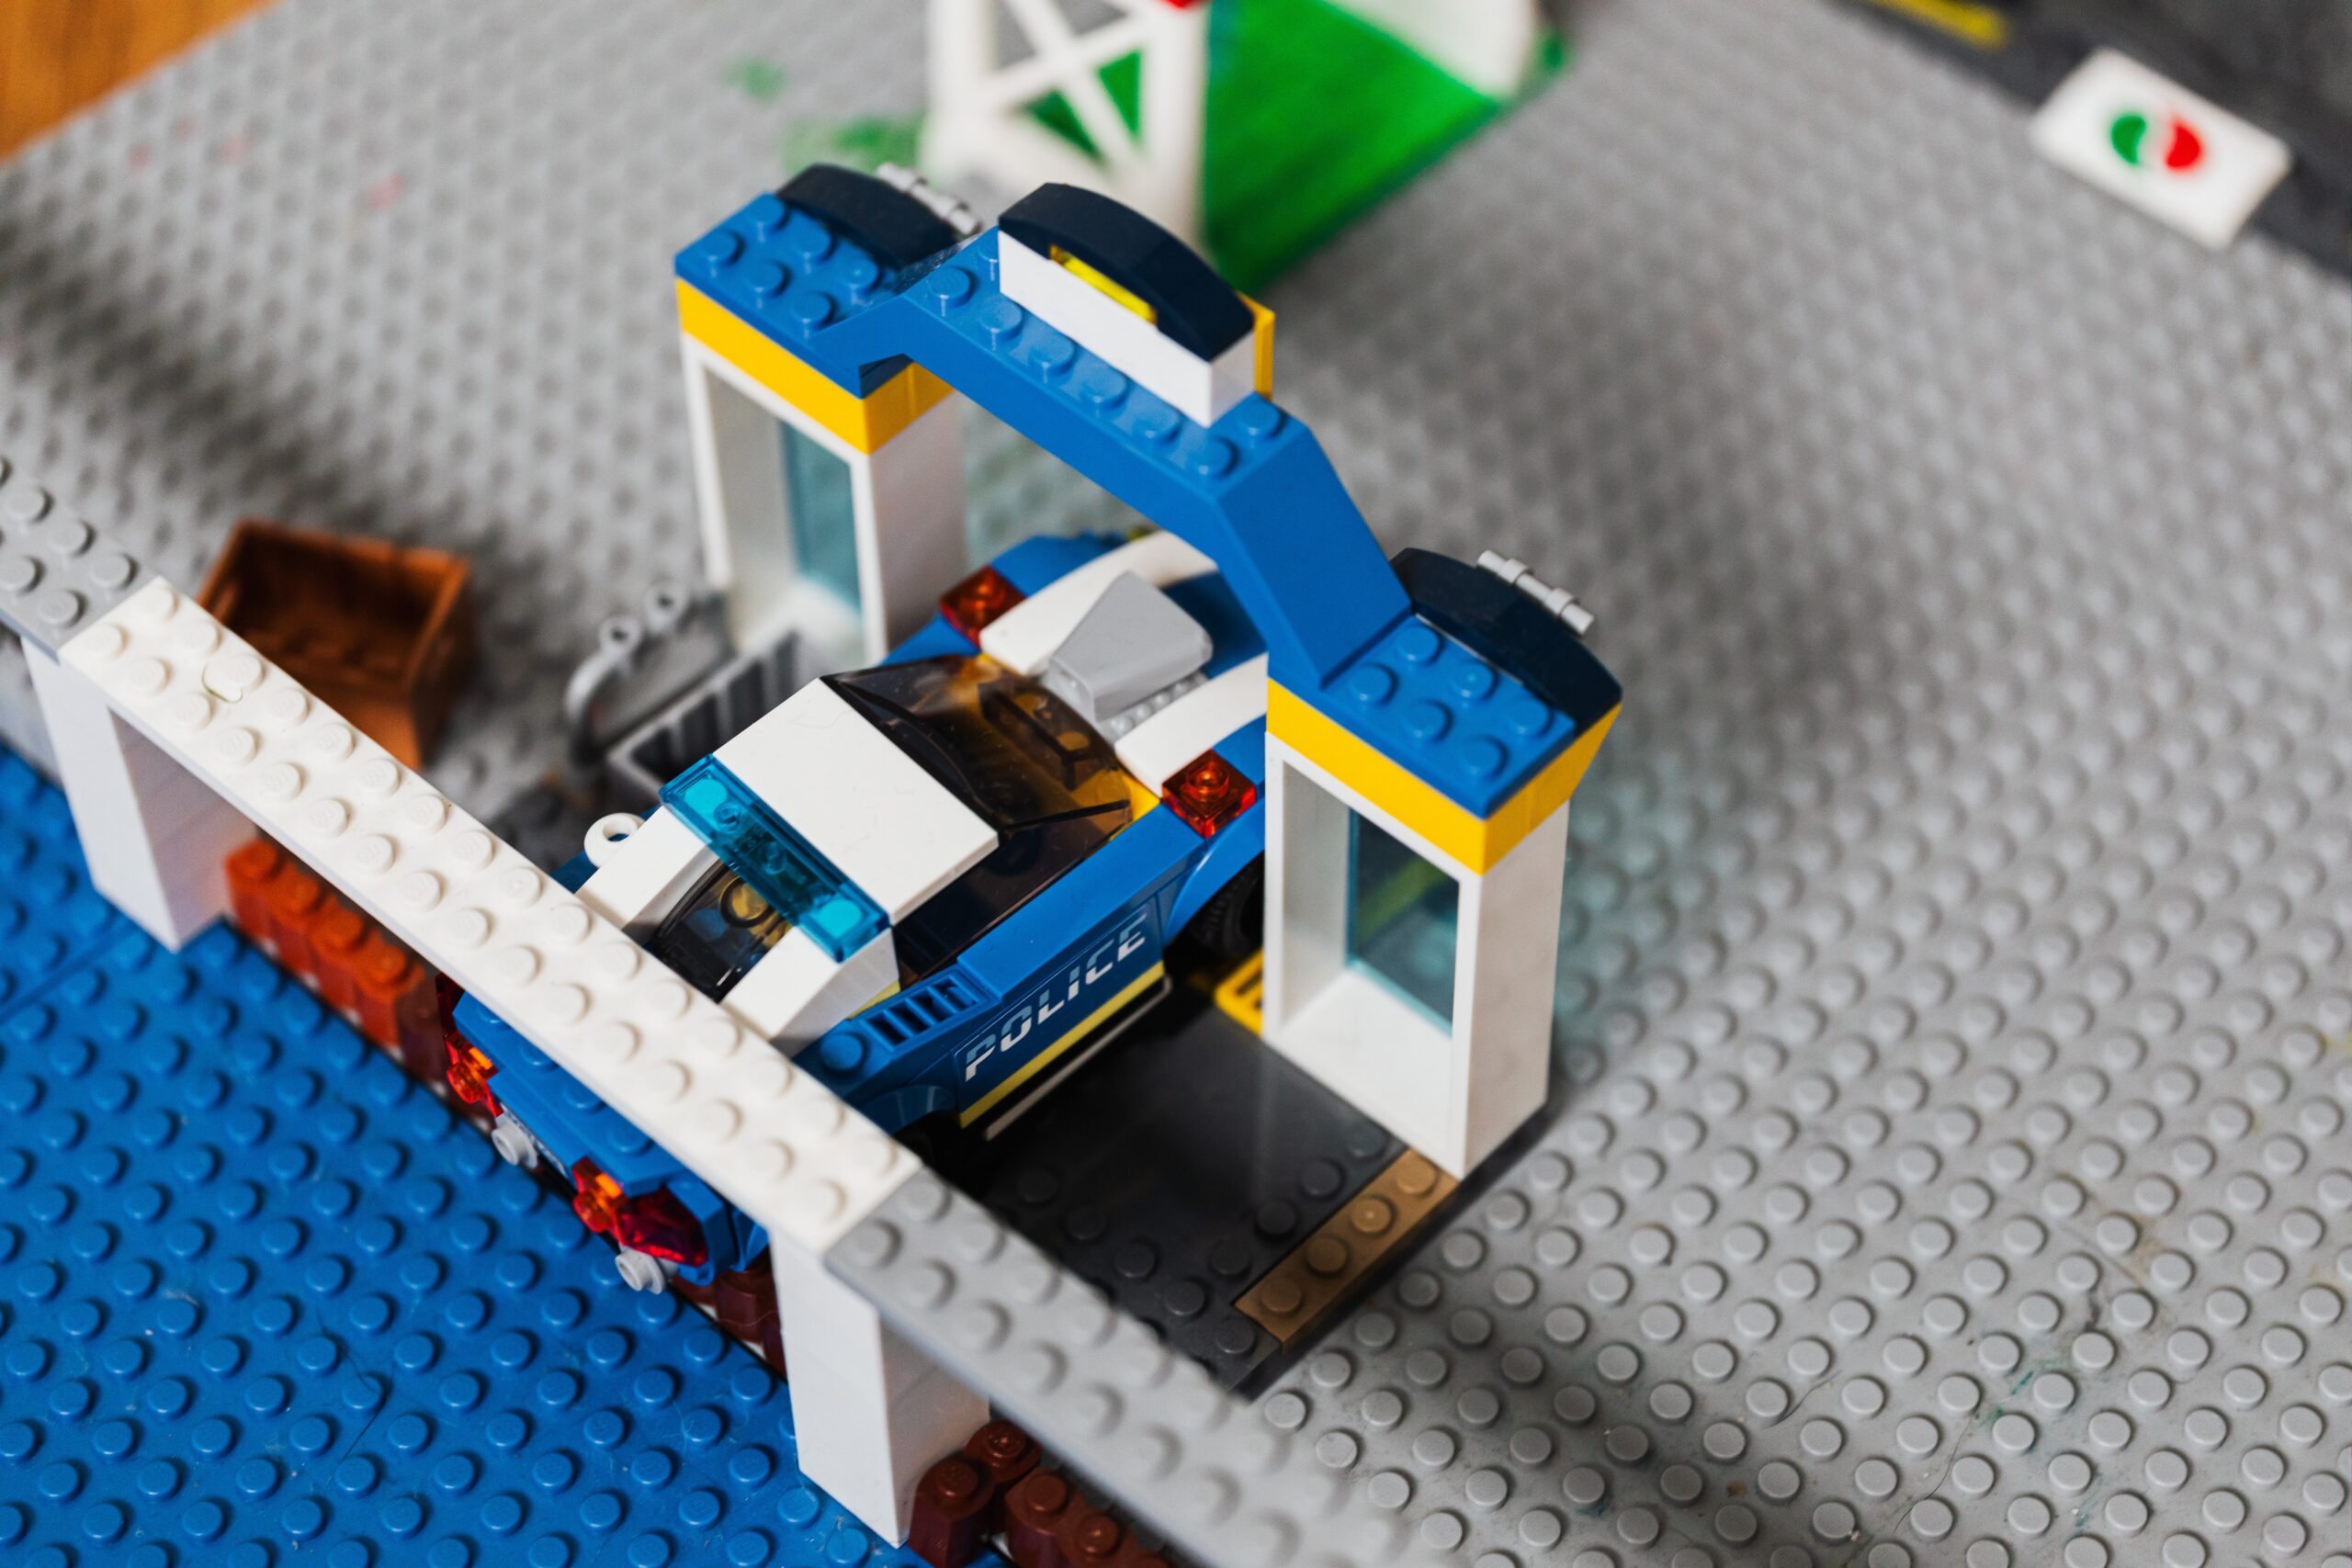 LEGO Sets Are Better Investments than Stocks, Bonds or Even Gold